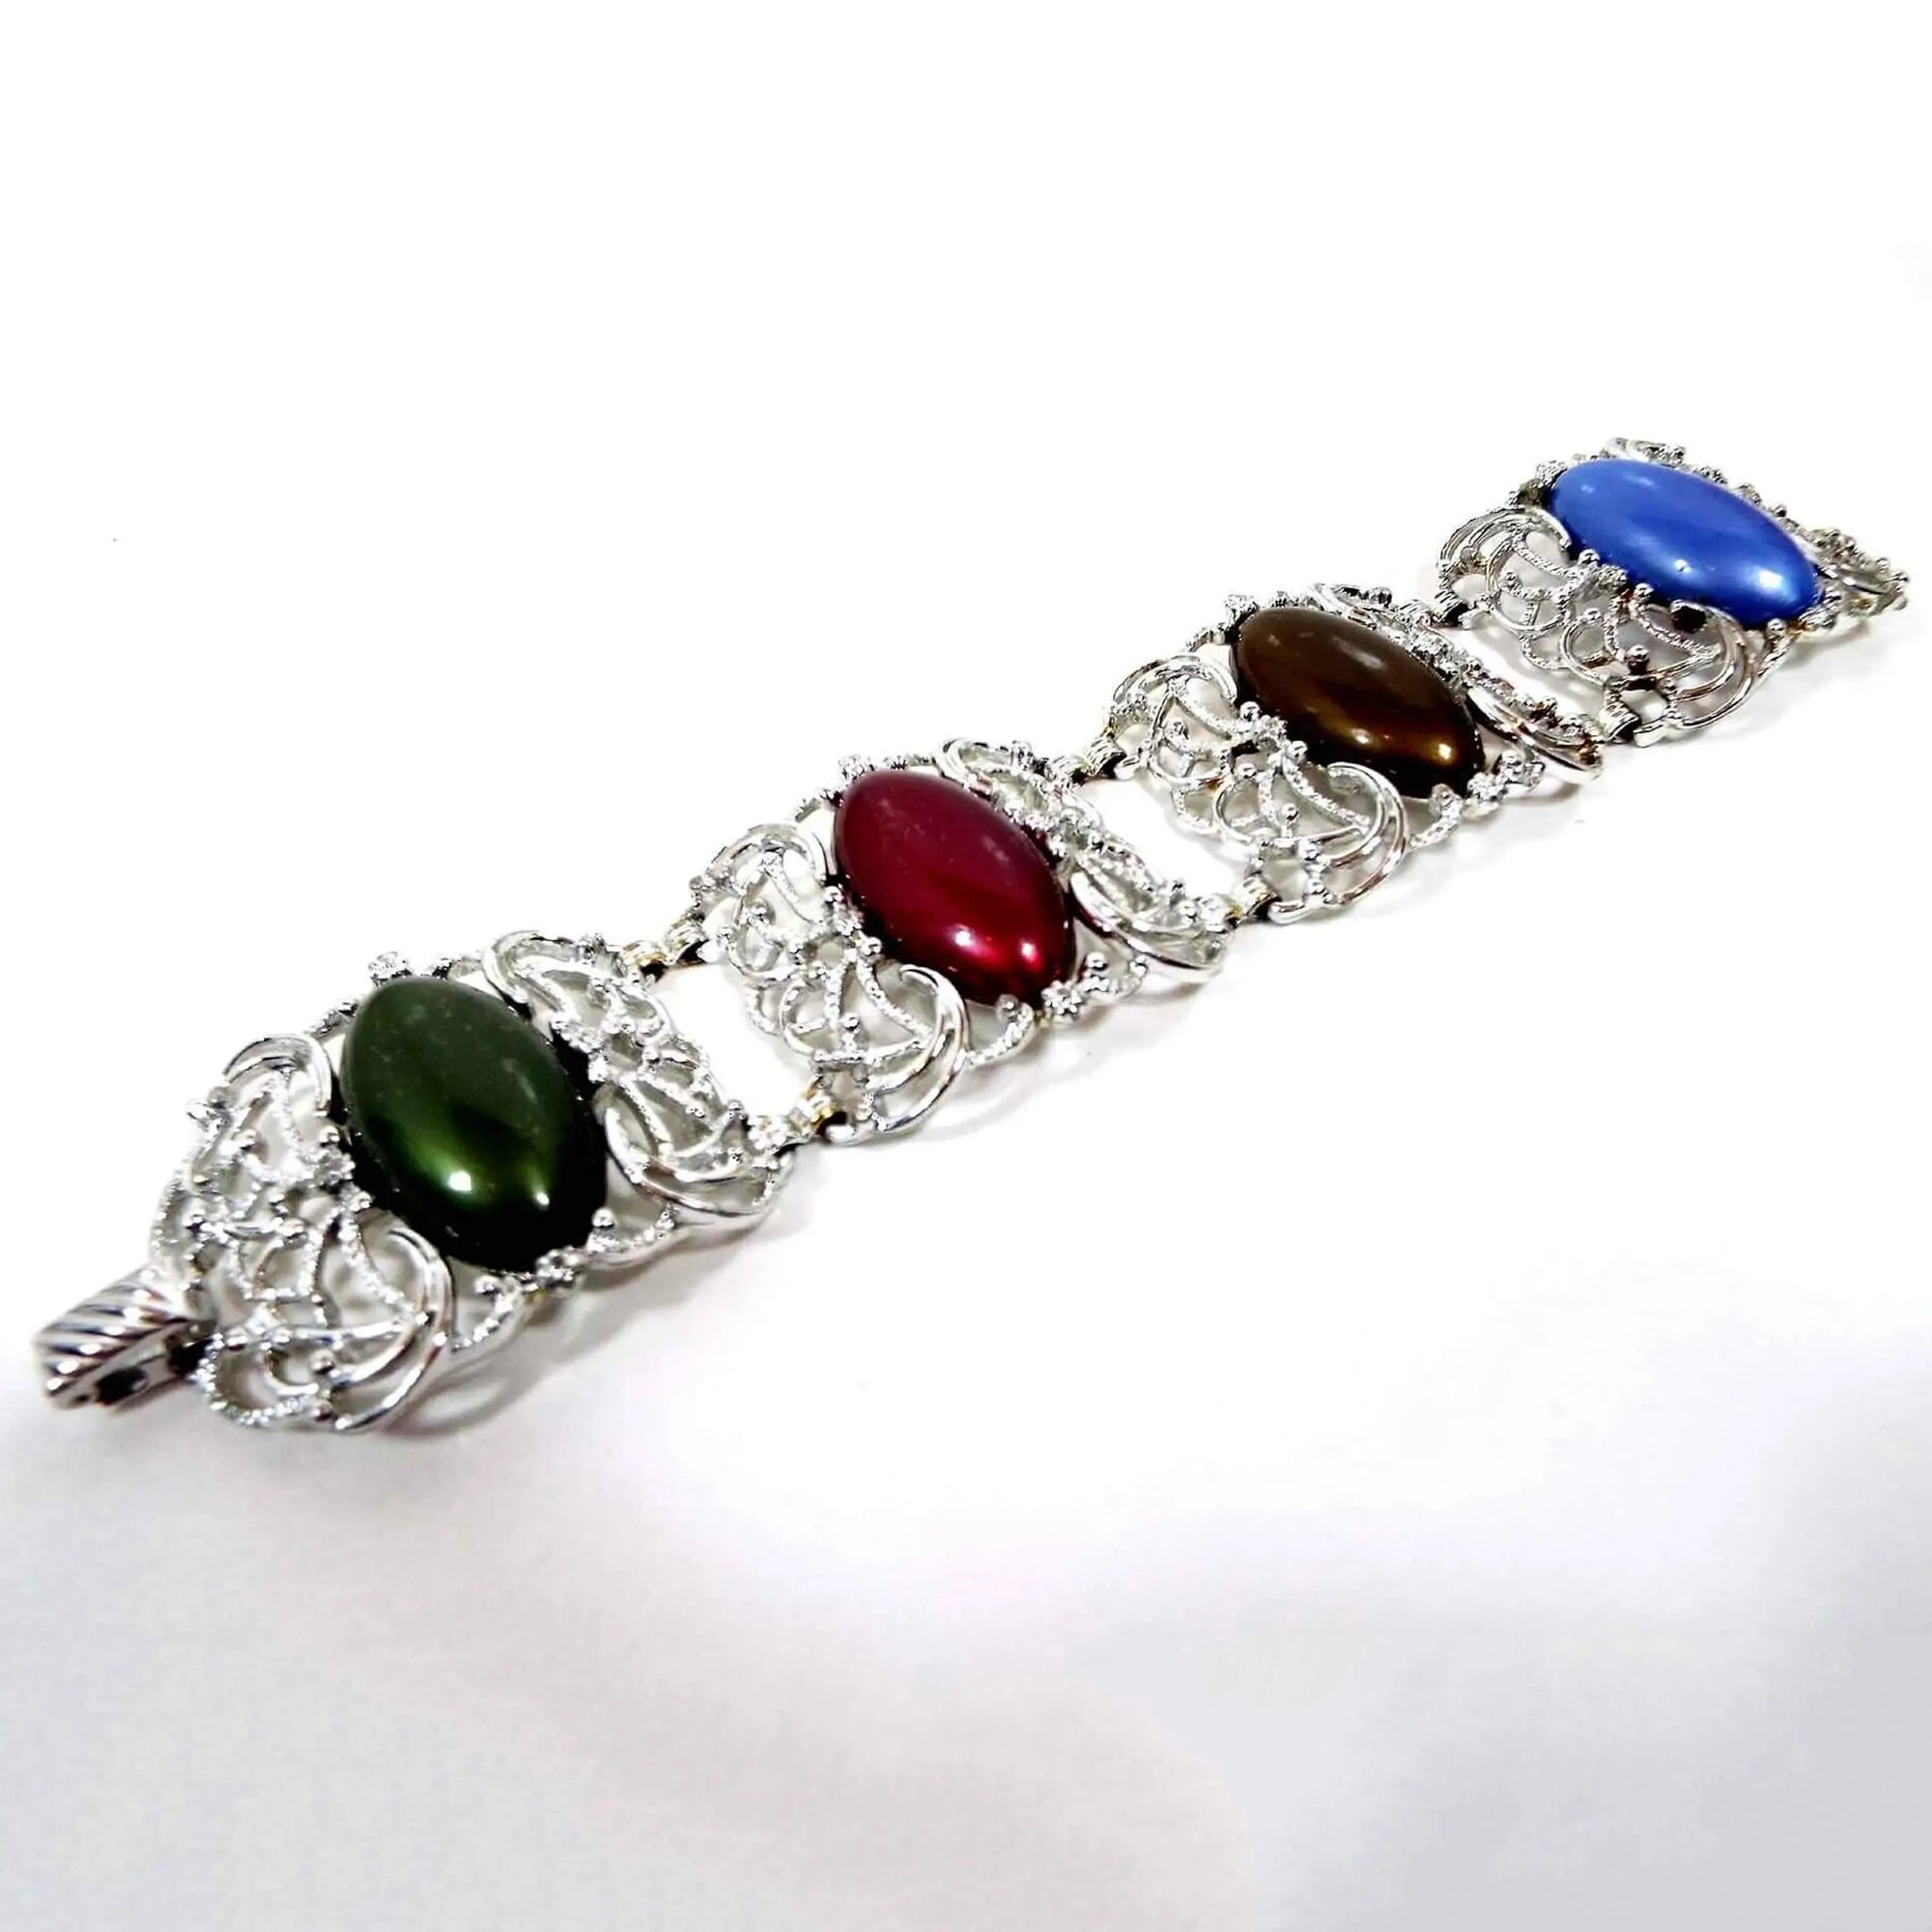 Top view of the Mid Century vintage Sarah Coventry link bracelet. It is silver tone in color with wide curved filigree links. Each link has a large oval lucite cab. Each one is a different color. There is green, red, brown, and blue. There is a snap lock clasp at the end.